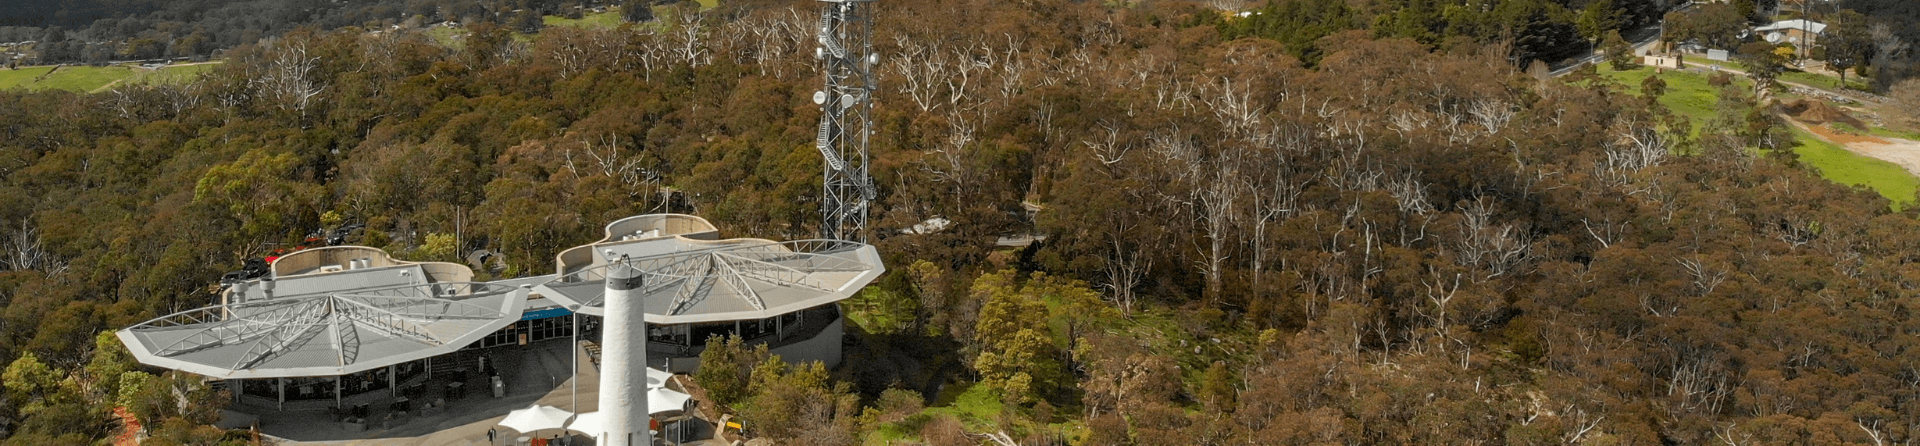 How to get to the Mount Lofty summit